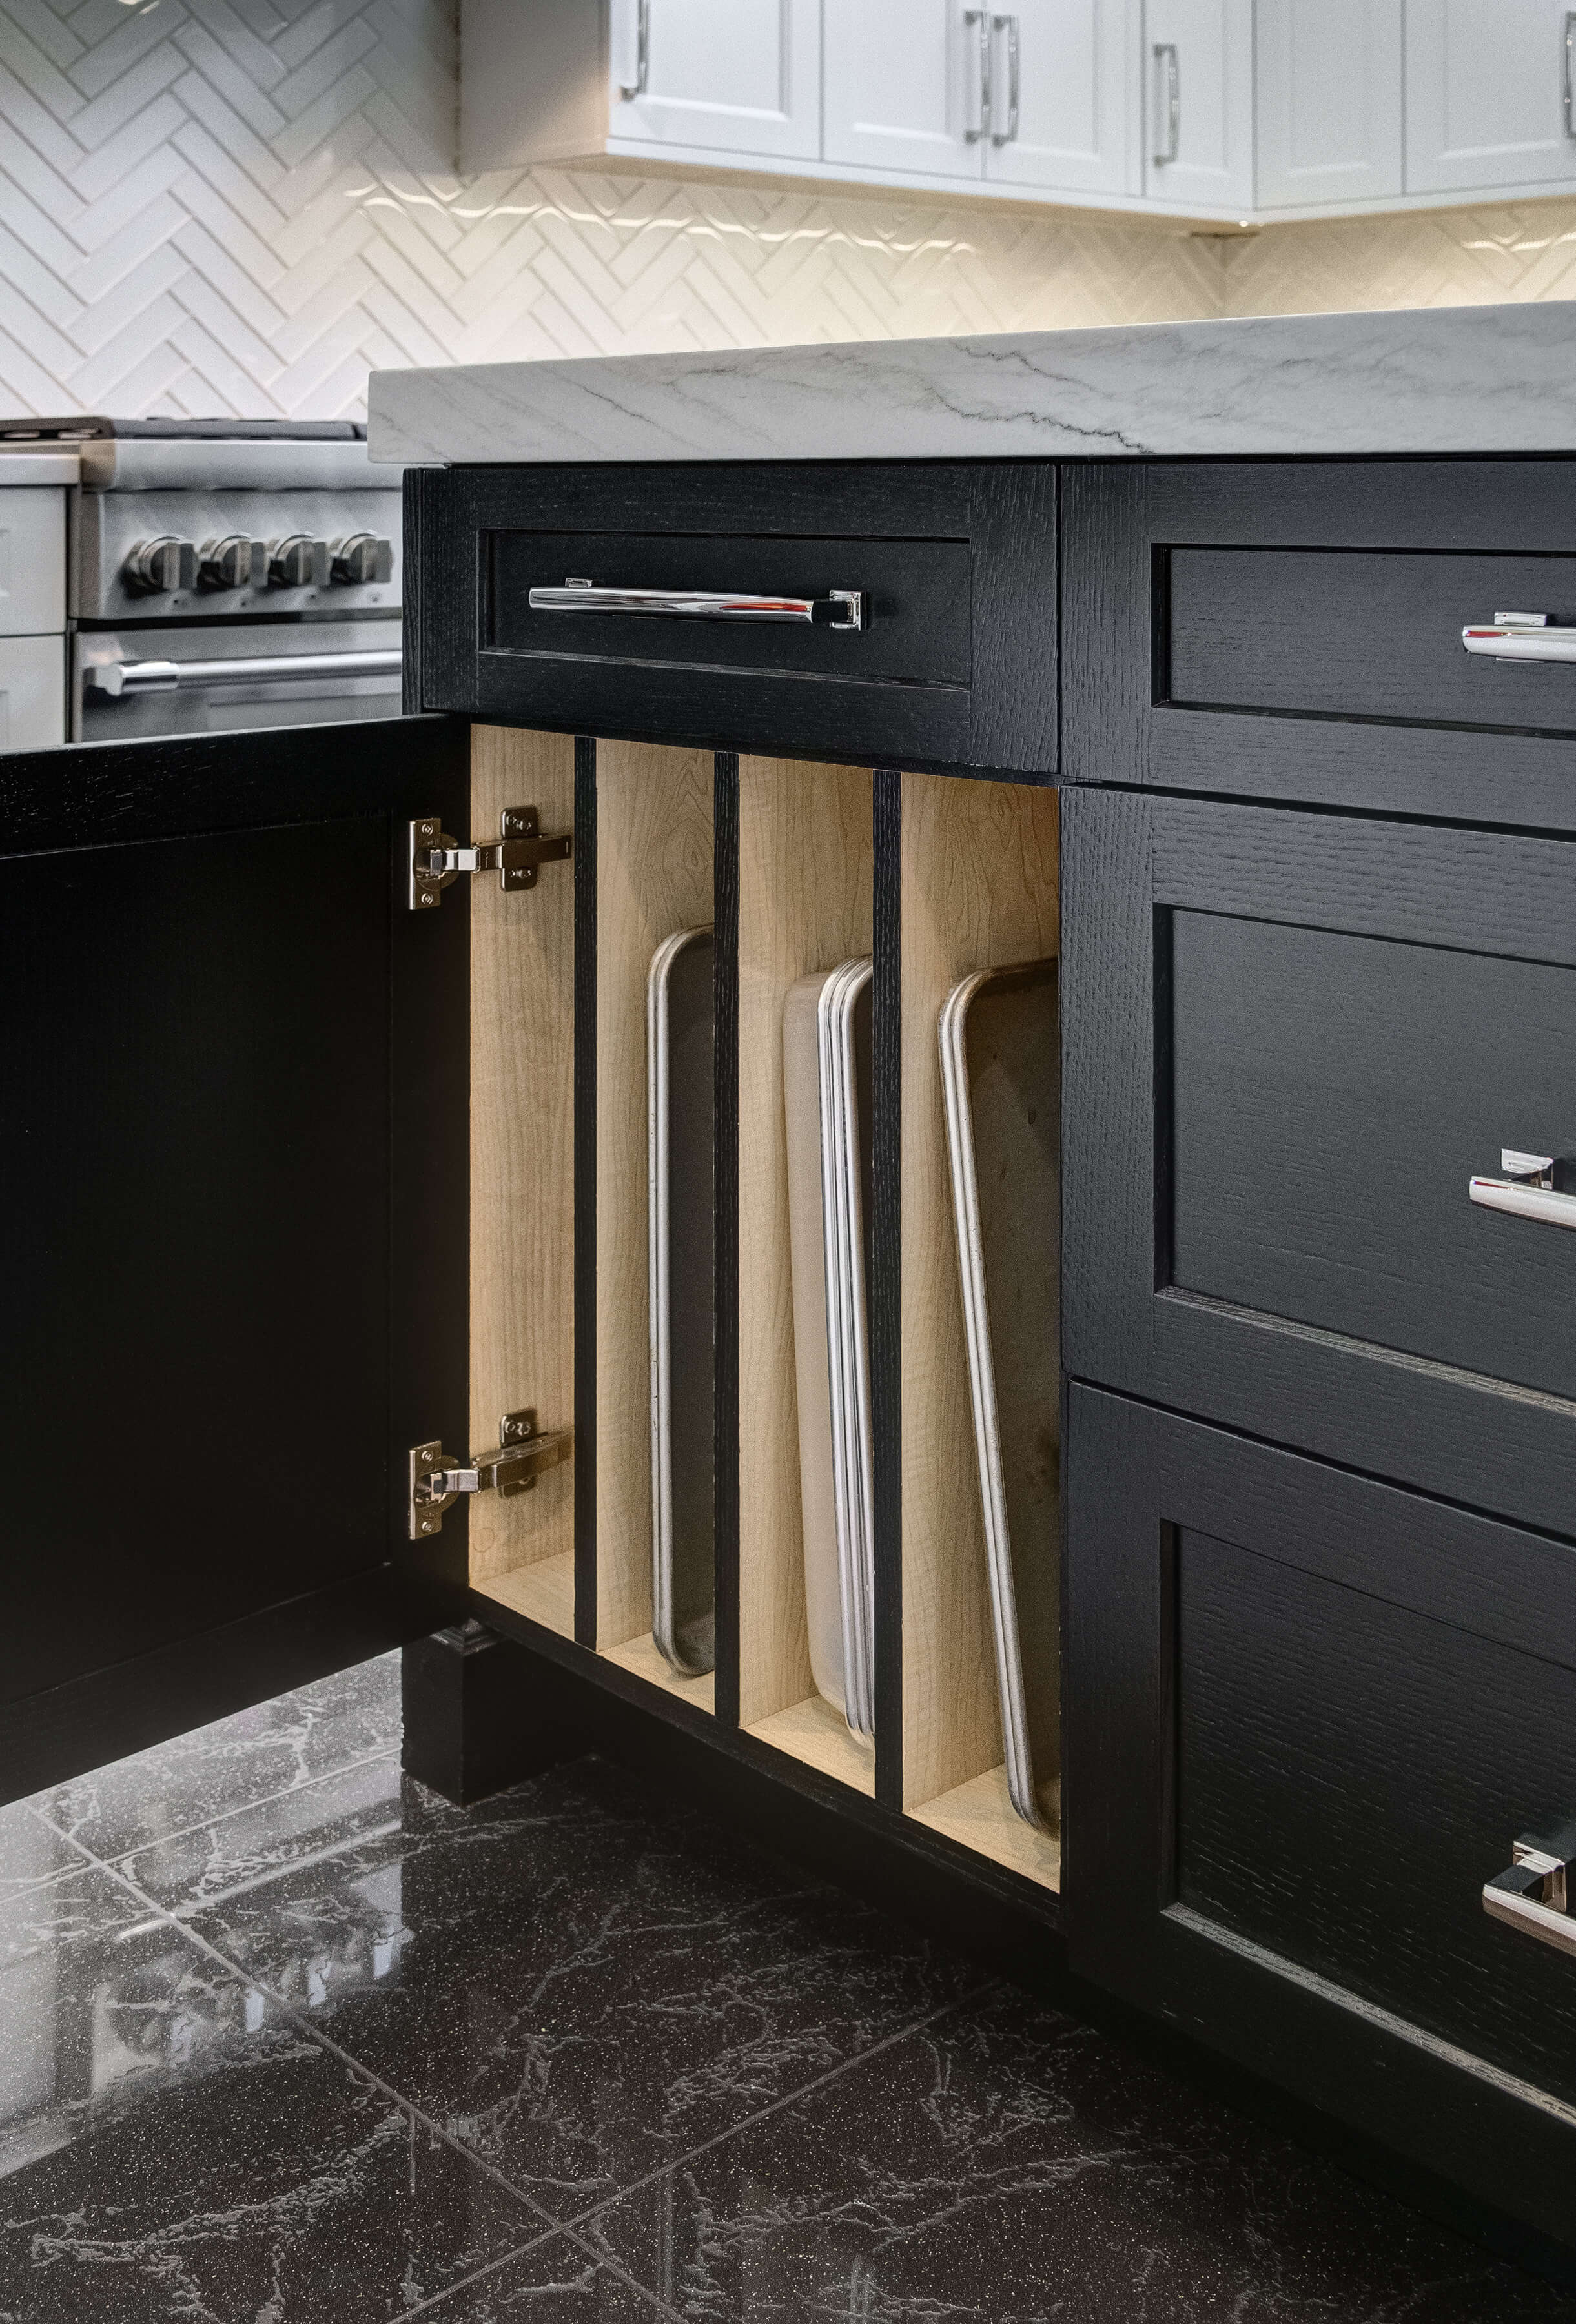 A kitchen island with black painted oak finish showing an open cabinet with organized storage for baking sheets.